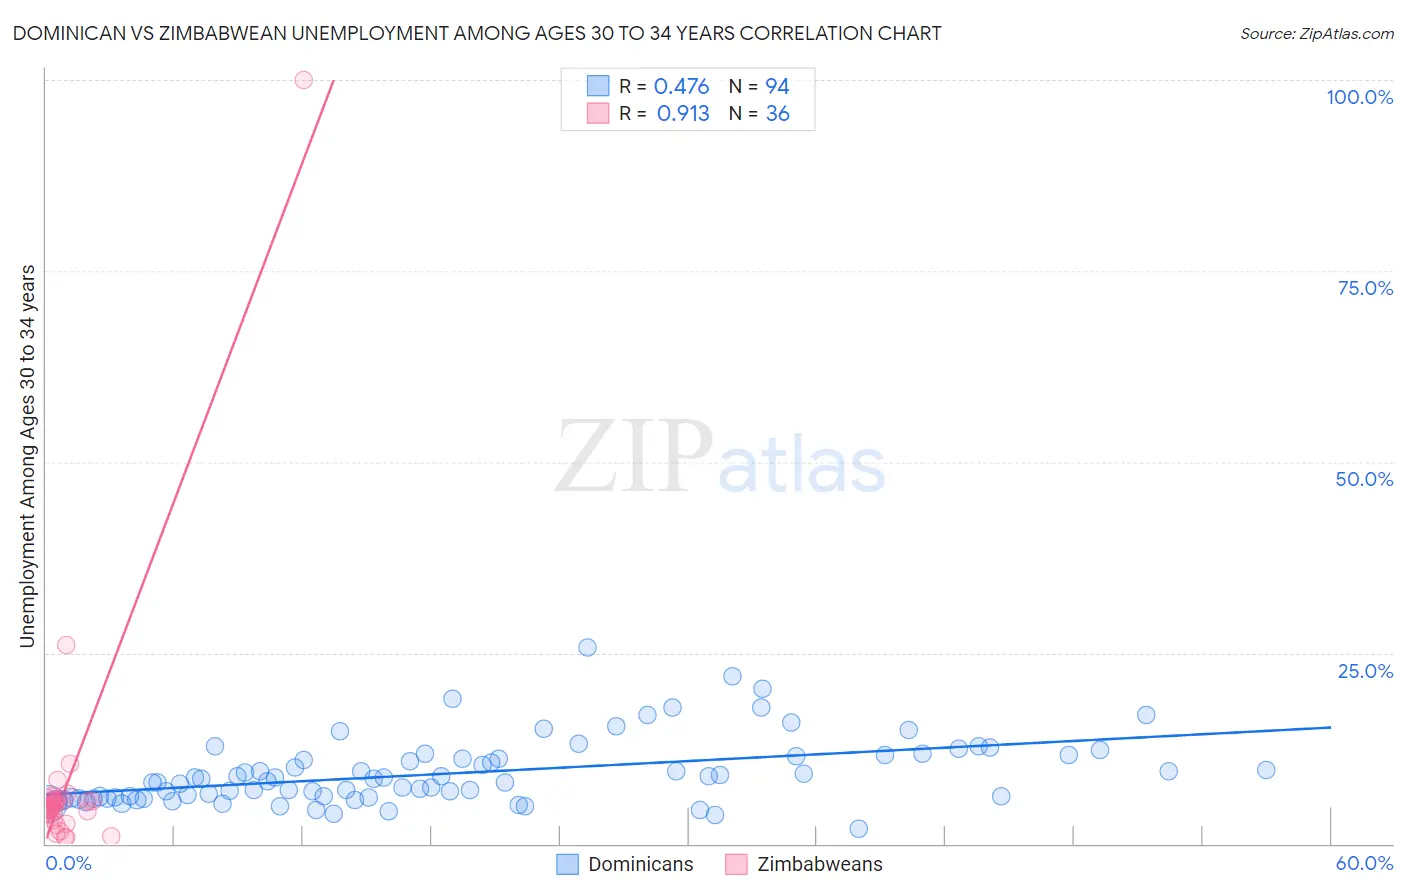 Dominican vs Zimbabwean Unemployment Among Ages 30 to 34 years